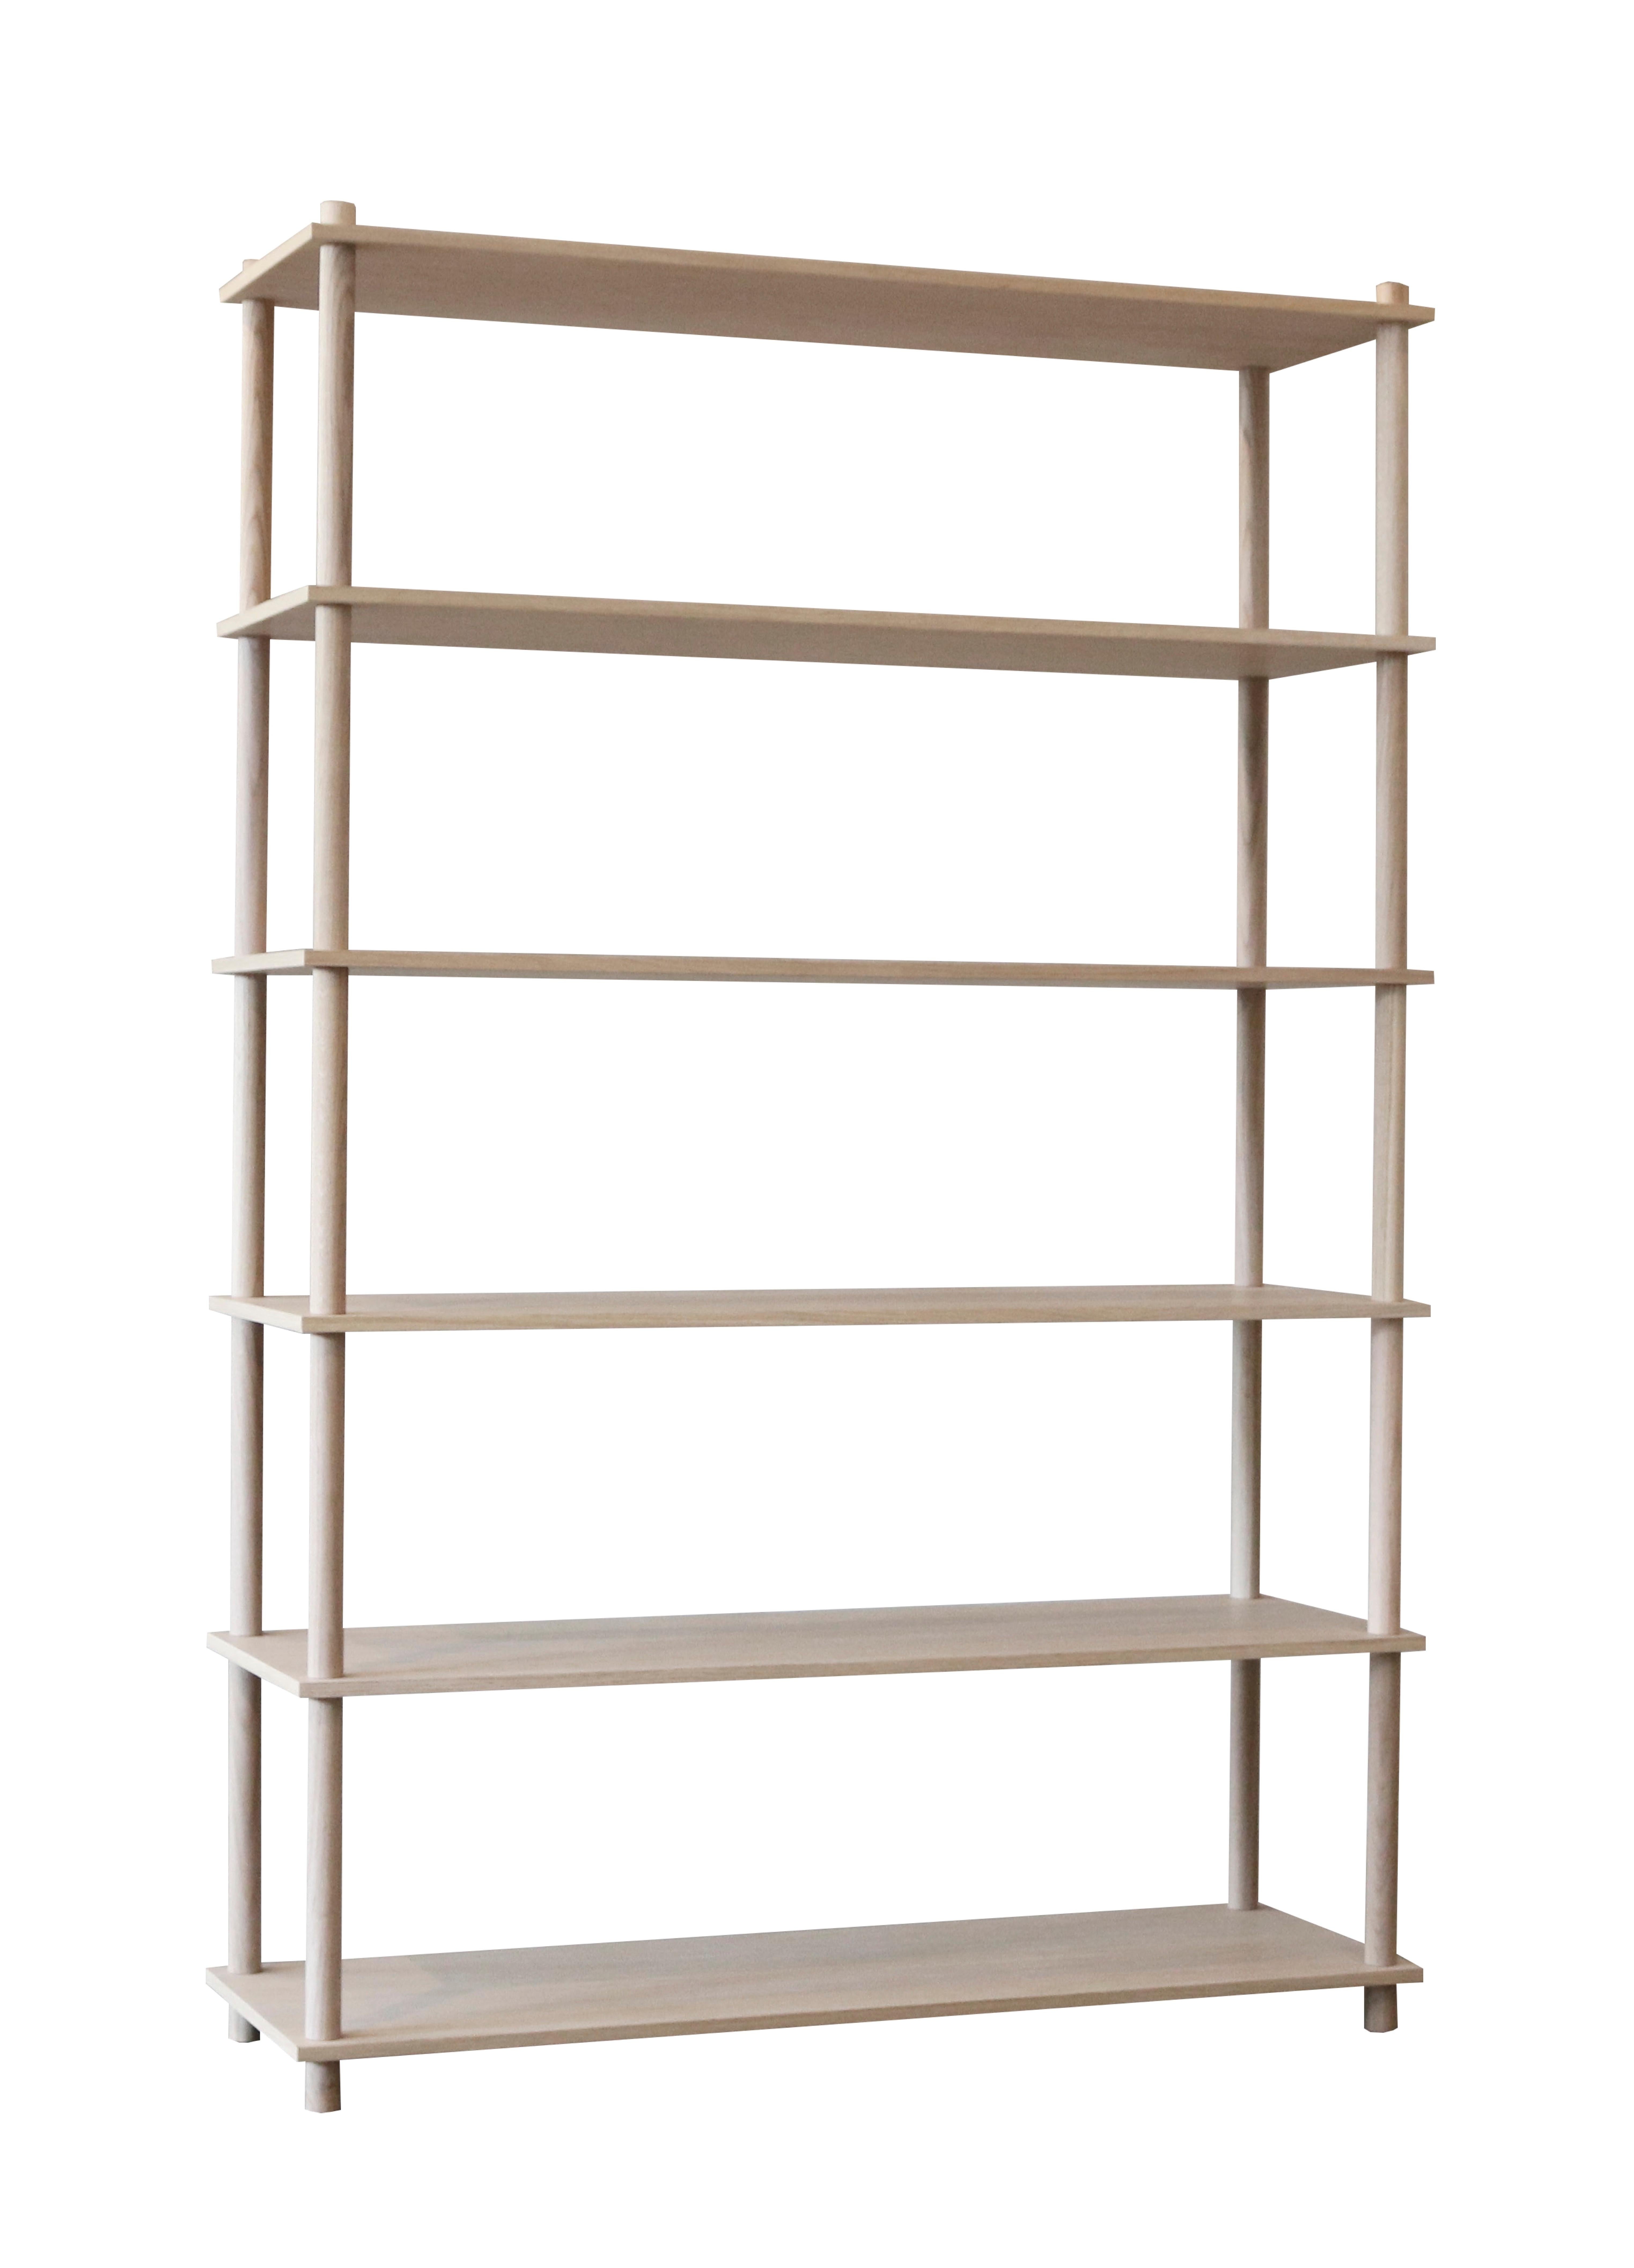 Oak elevate shelving VI by Camilla Akersveen and Christopher Konings.
Materials: metal, oak.
Dimensions: D 40 x W 120 x H 182.6 cm.
Available in matt lacquered oak or black oak. Different shelving sistems available.

Camilla Akersveen and